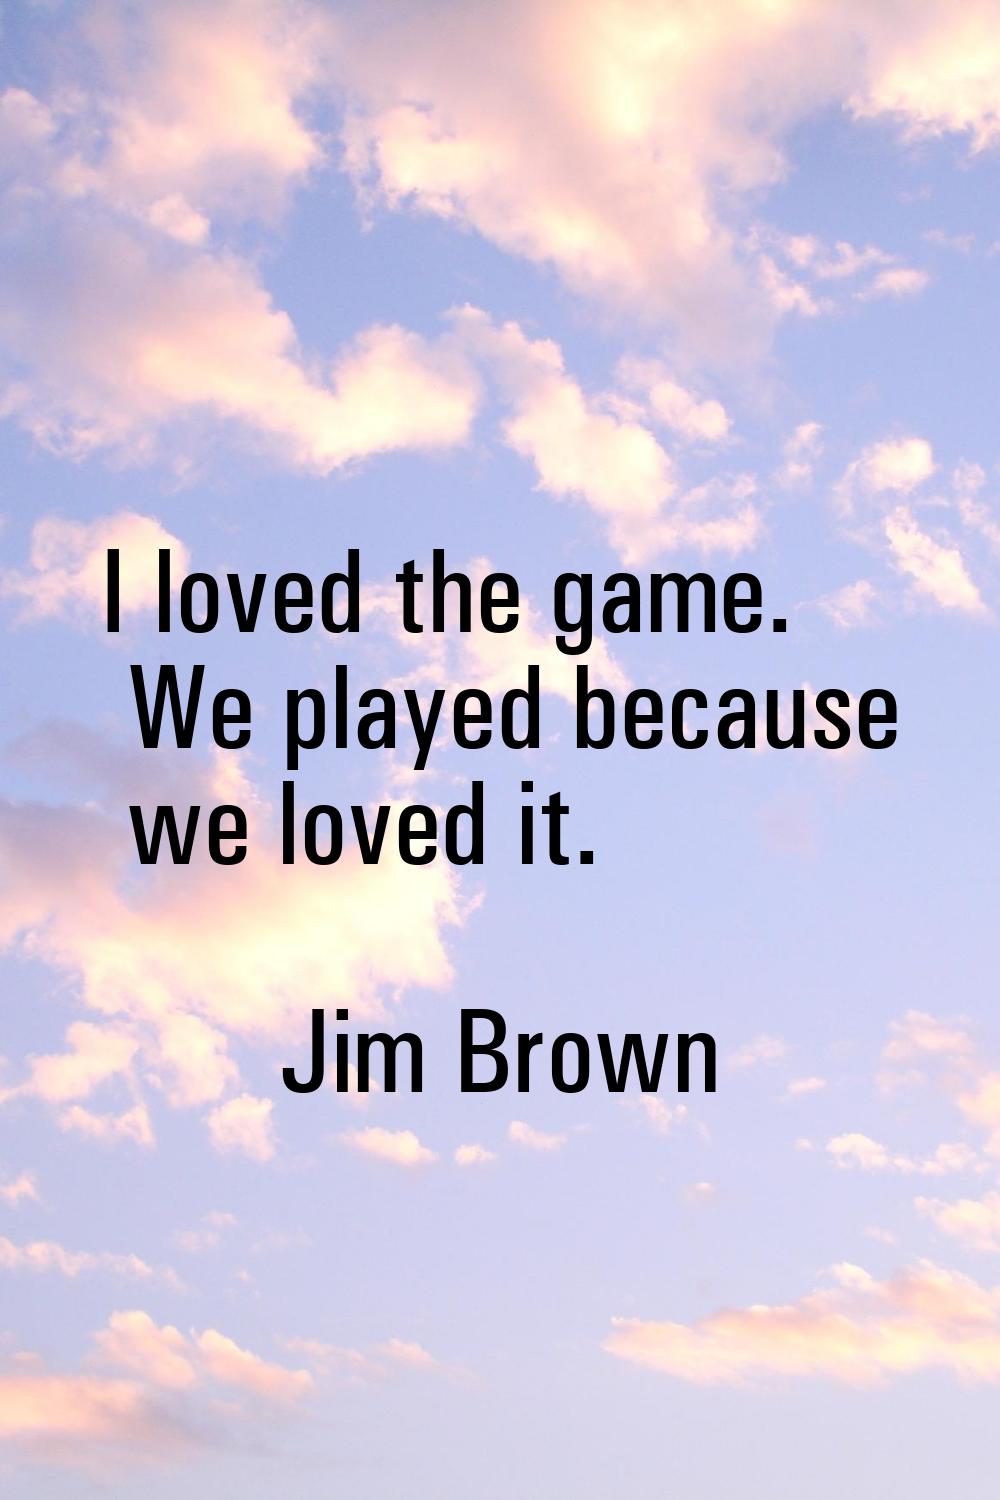 I loved the game. We played because we loved it.